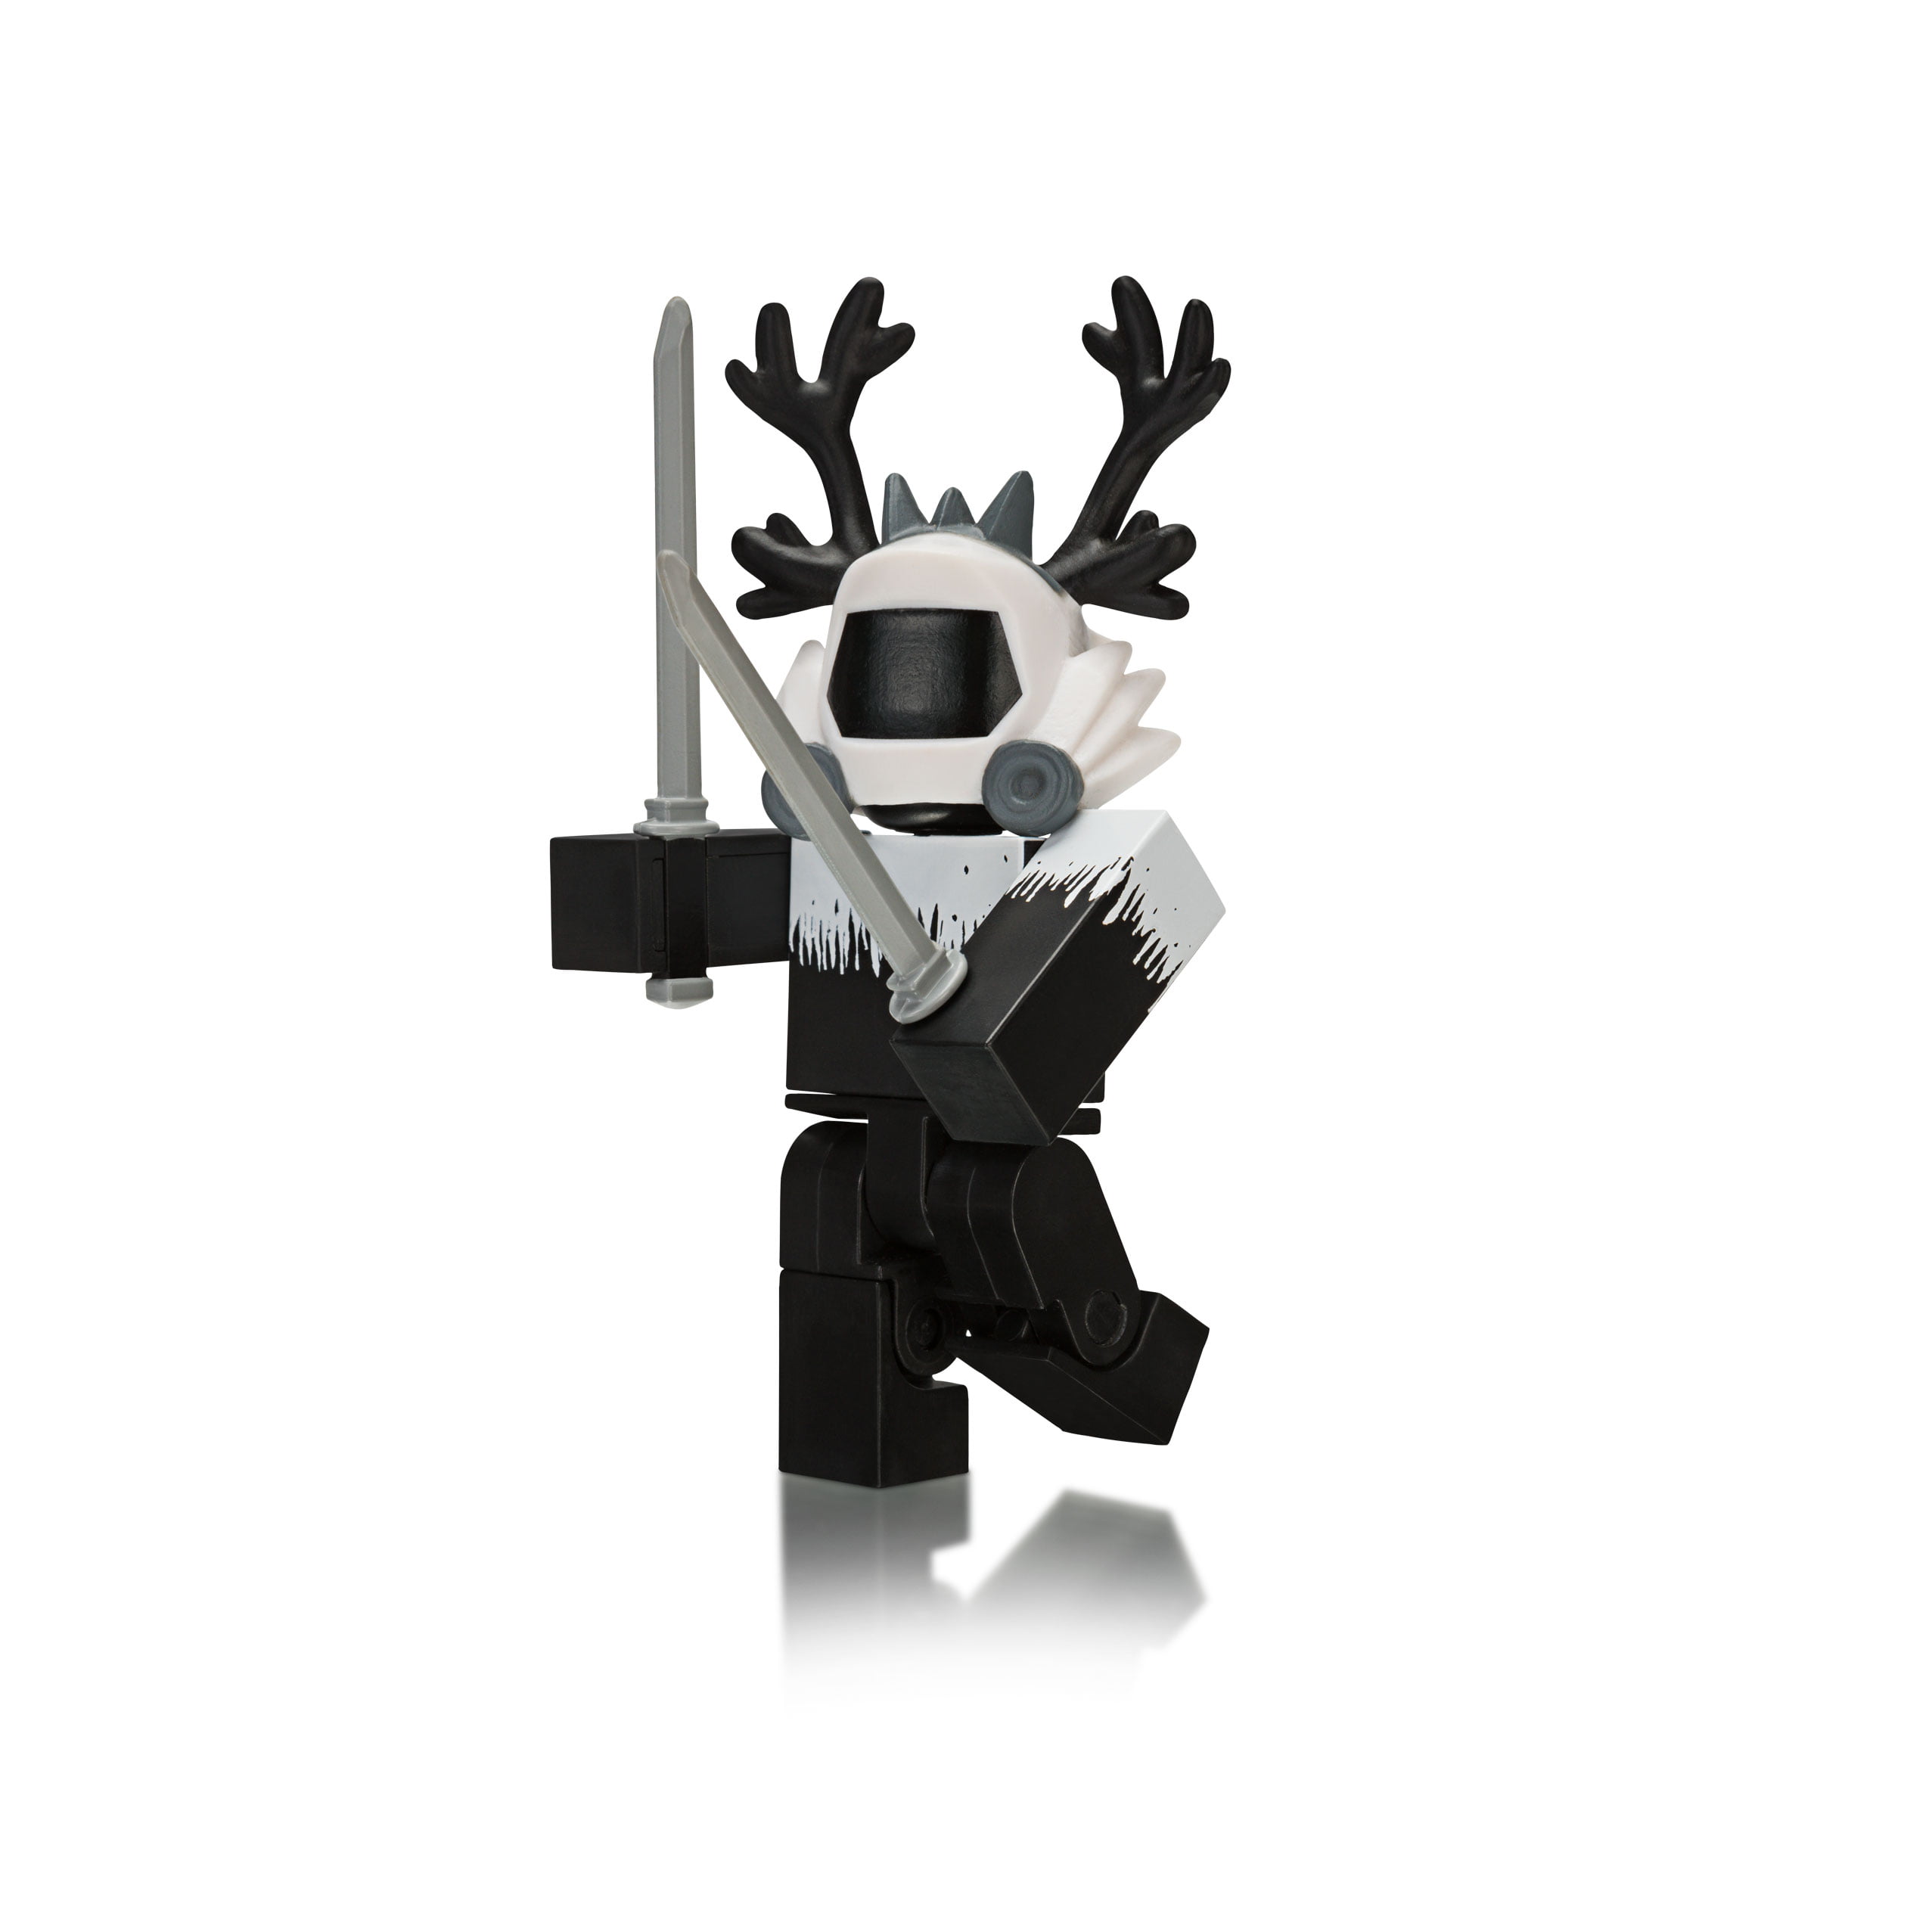 Roblox Action Collection Series 6 Mystery Figure Includes 1 Figure Exclusive Virtual Item Walmart Com Walmart Com - roblox miners haven s8000 life qna plus black friday